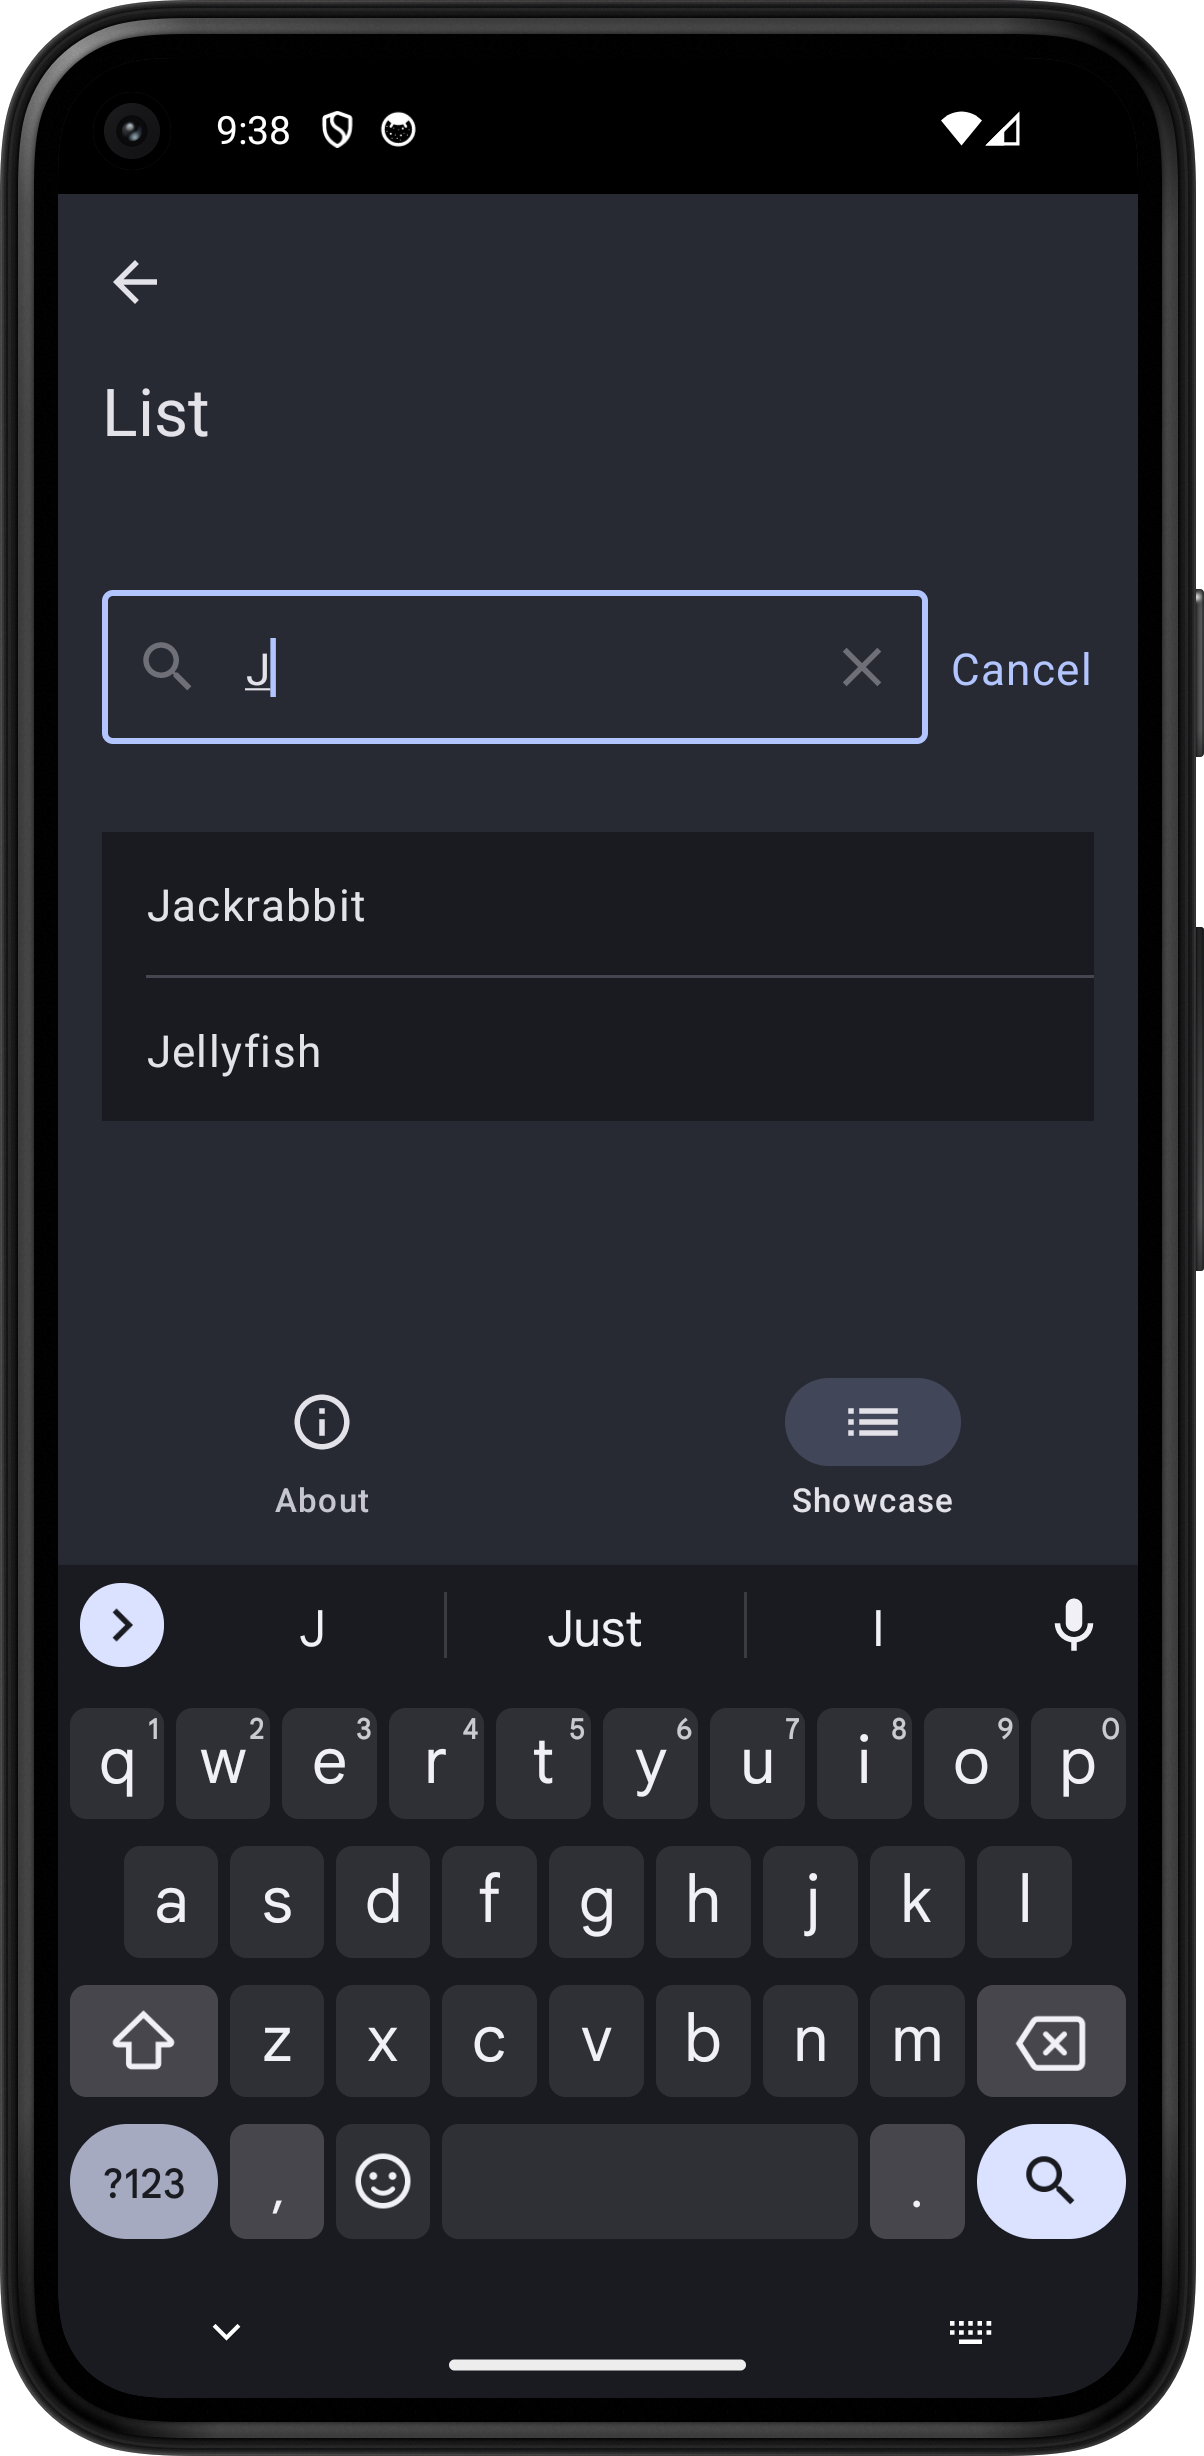 Android screenshot for List component (dark mode)